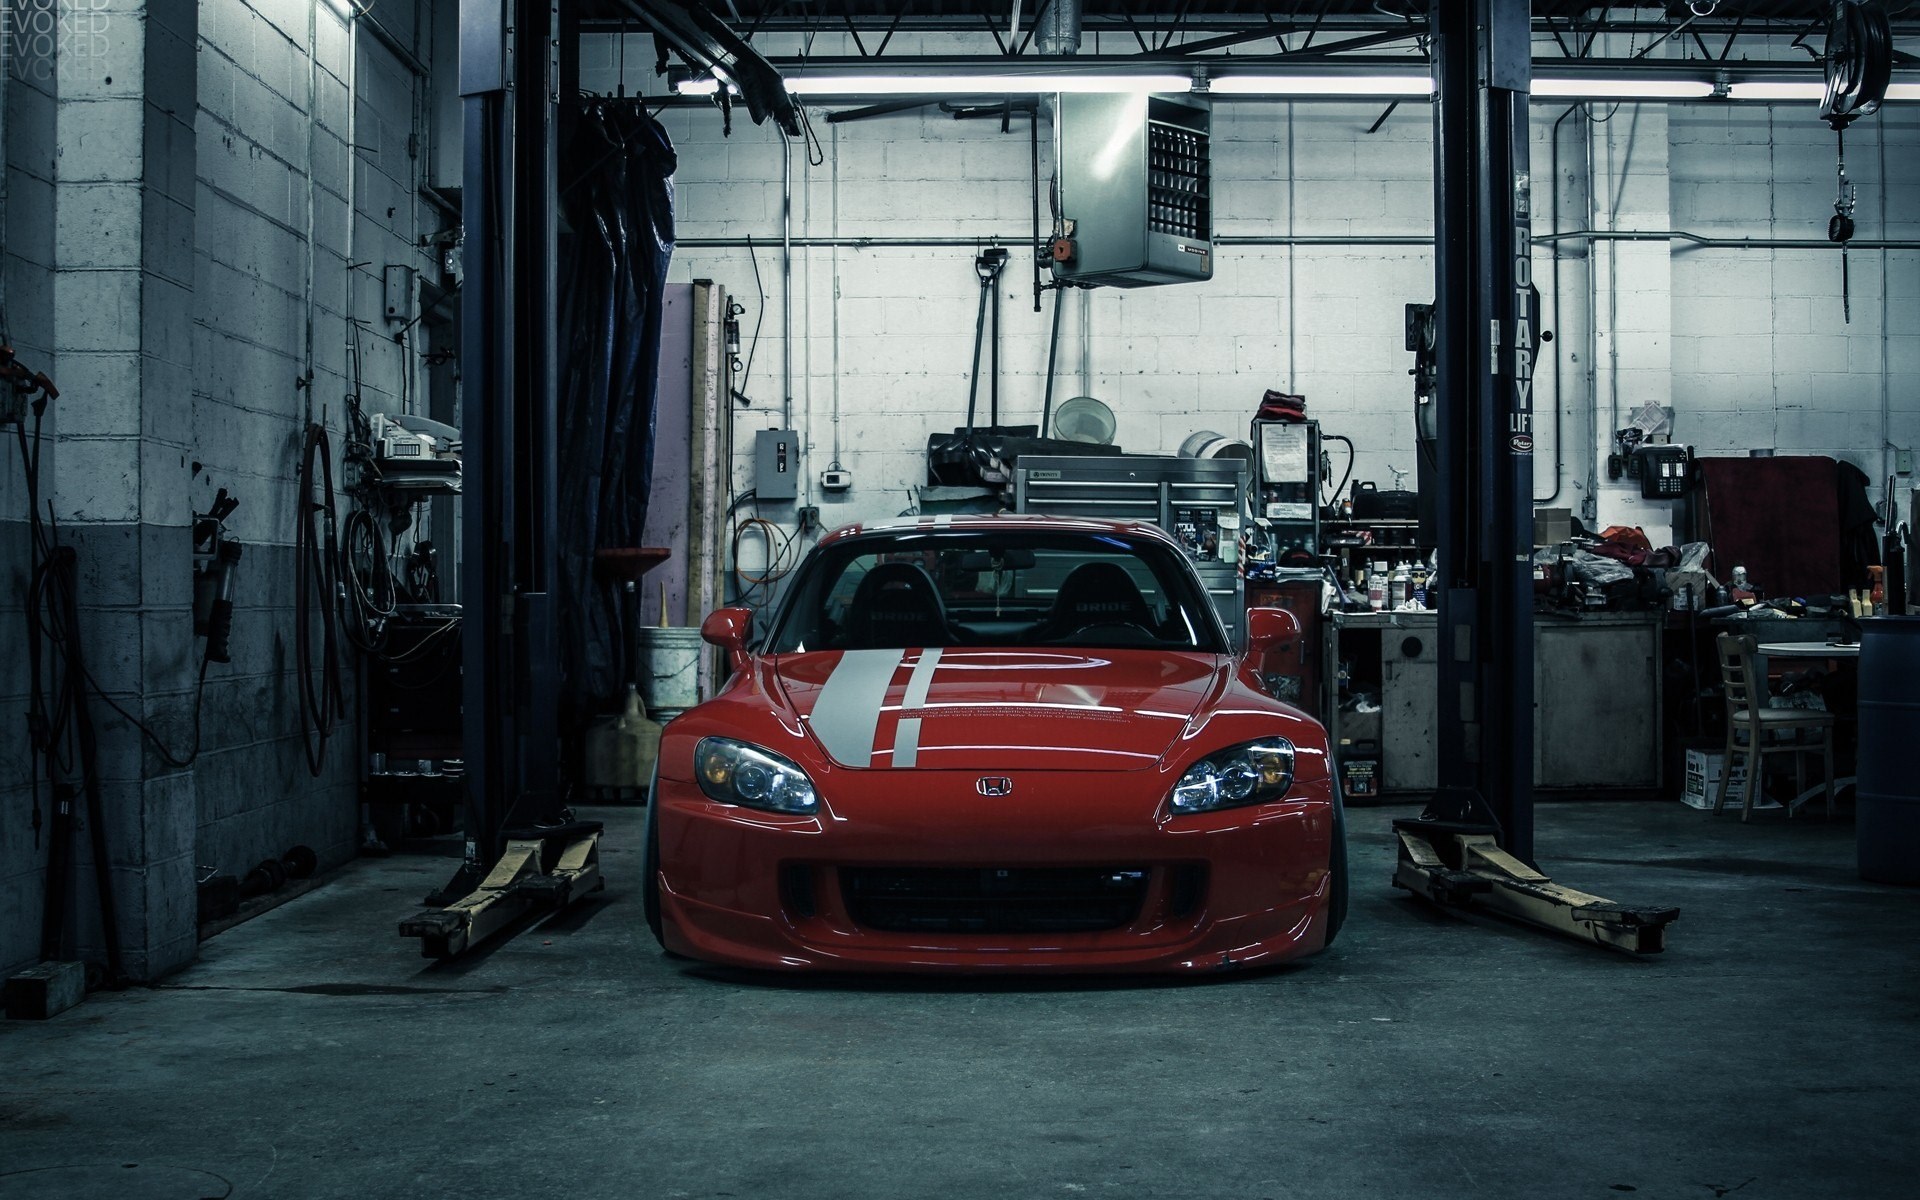 Gorgeous Honda S2000 Wallpaper Full HD Pictures